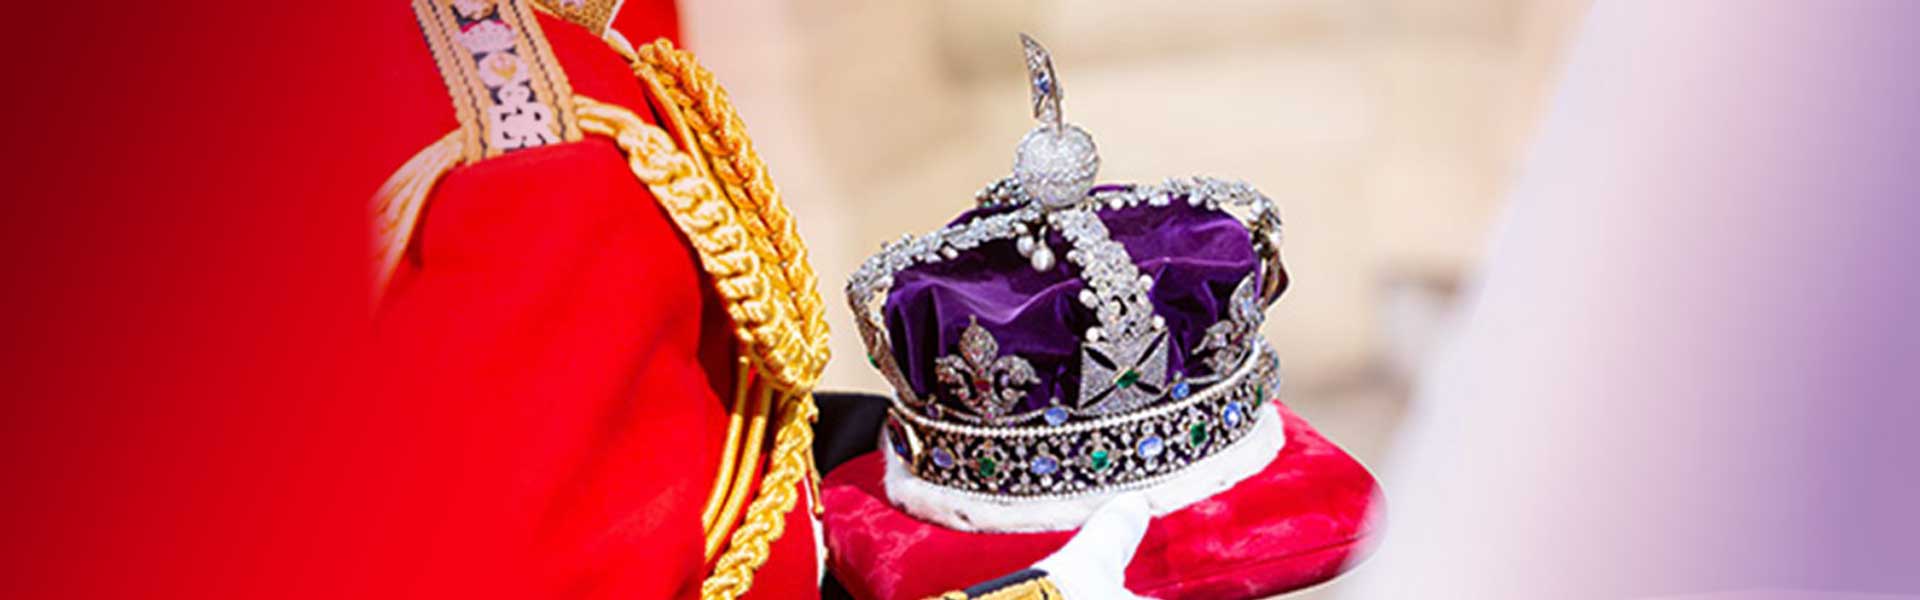 Royal crown being carried in Parliament